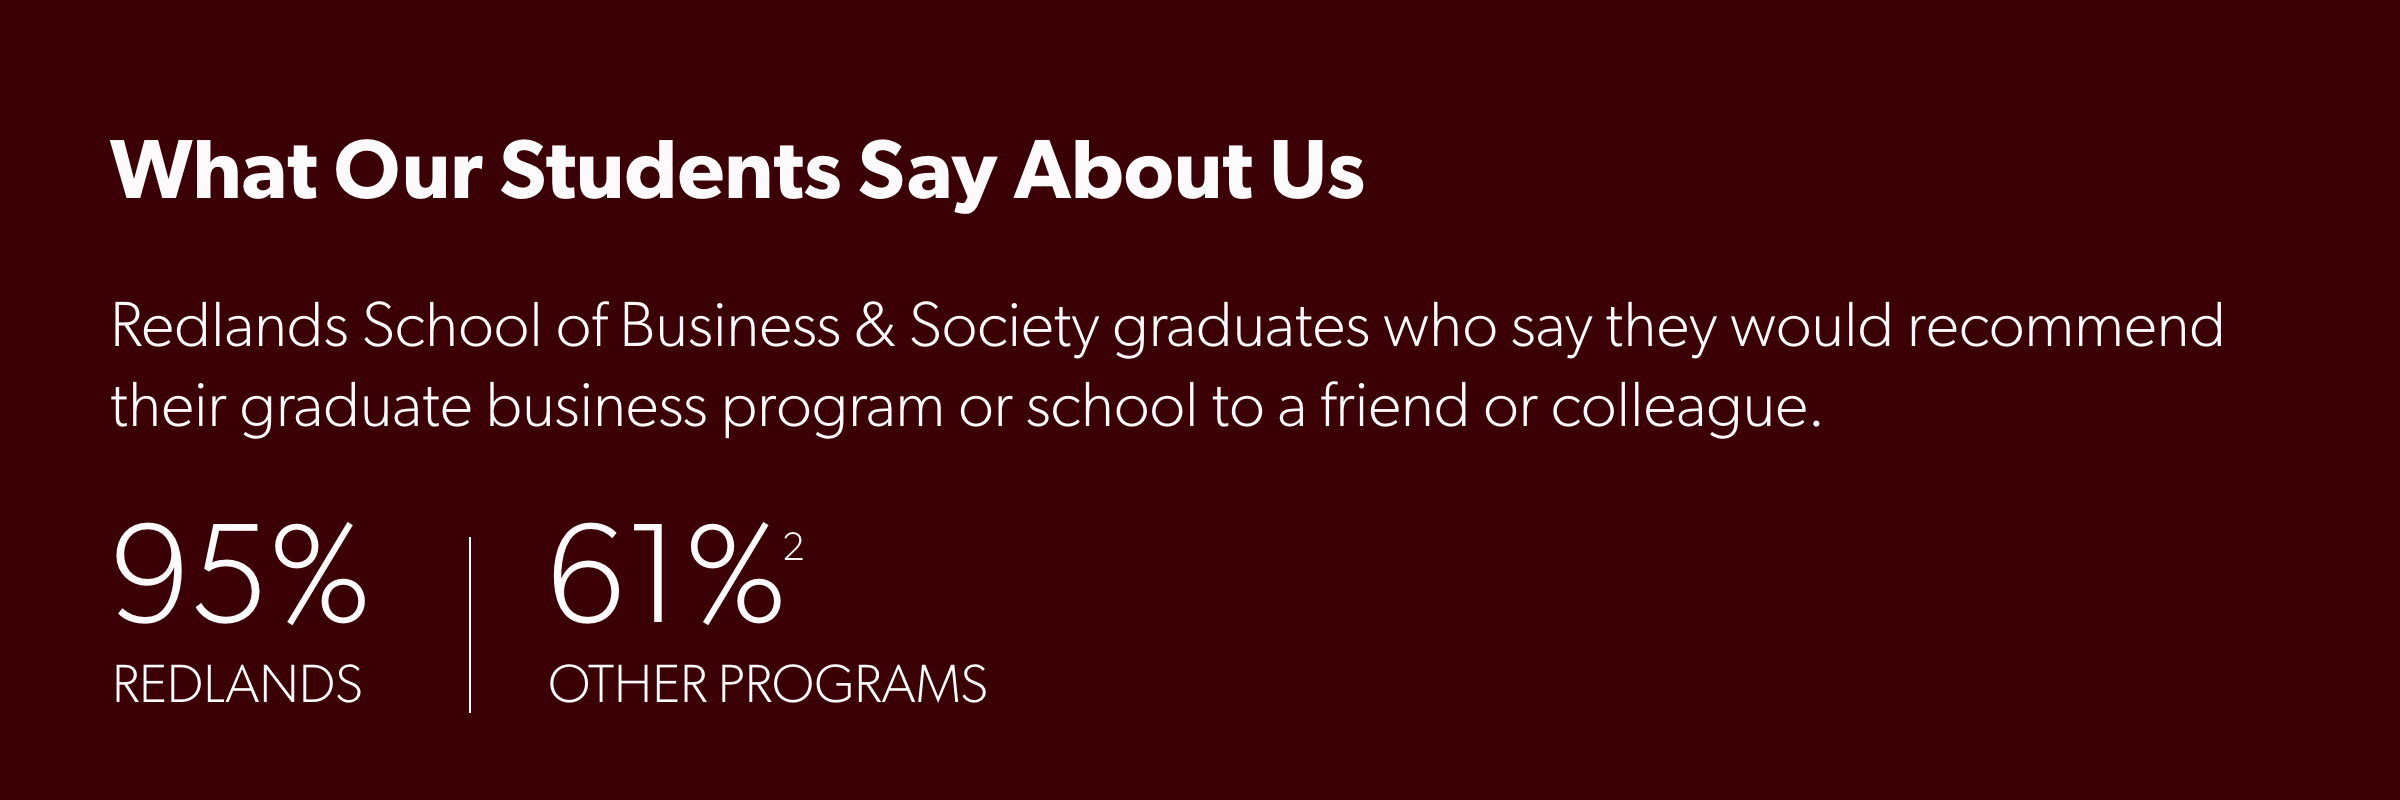 Redlands School of Business graduates who say they would recommend their graduate business program or school to a friend or colleague. Redlands: 95% / Other Programs: 61%2